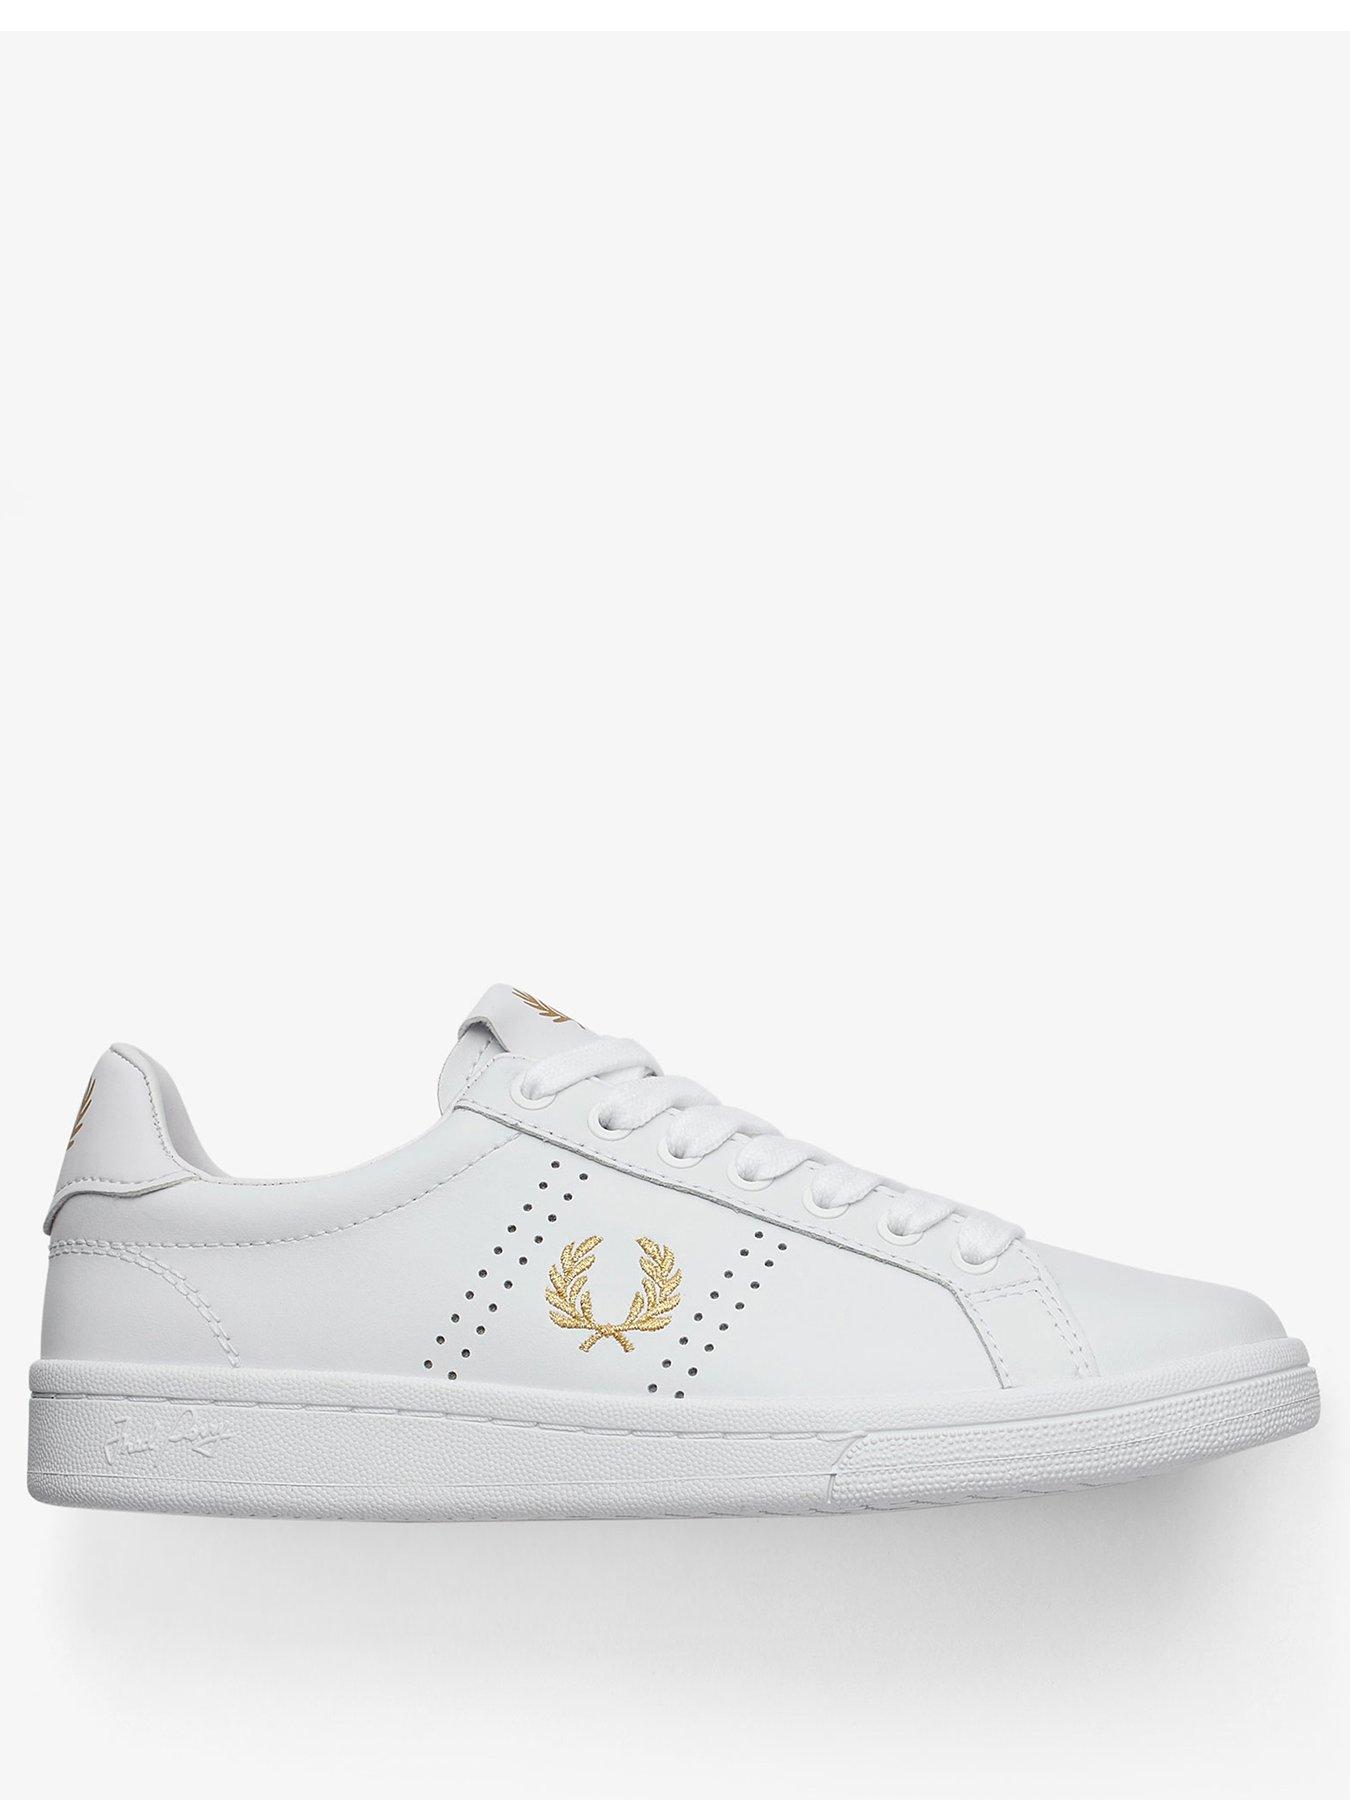 Fred perry | Womens sports shoes 